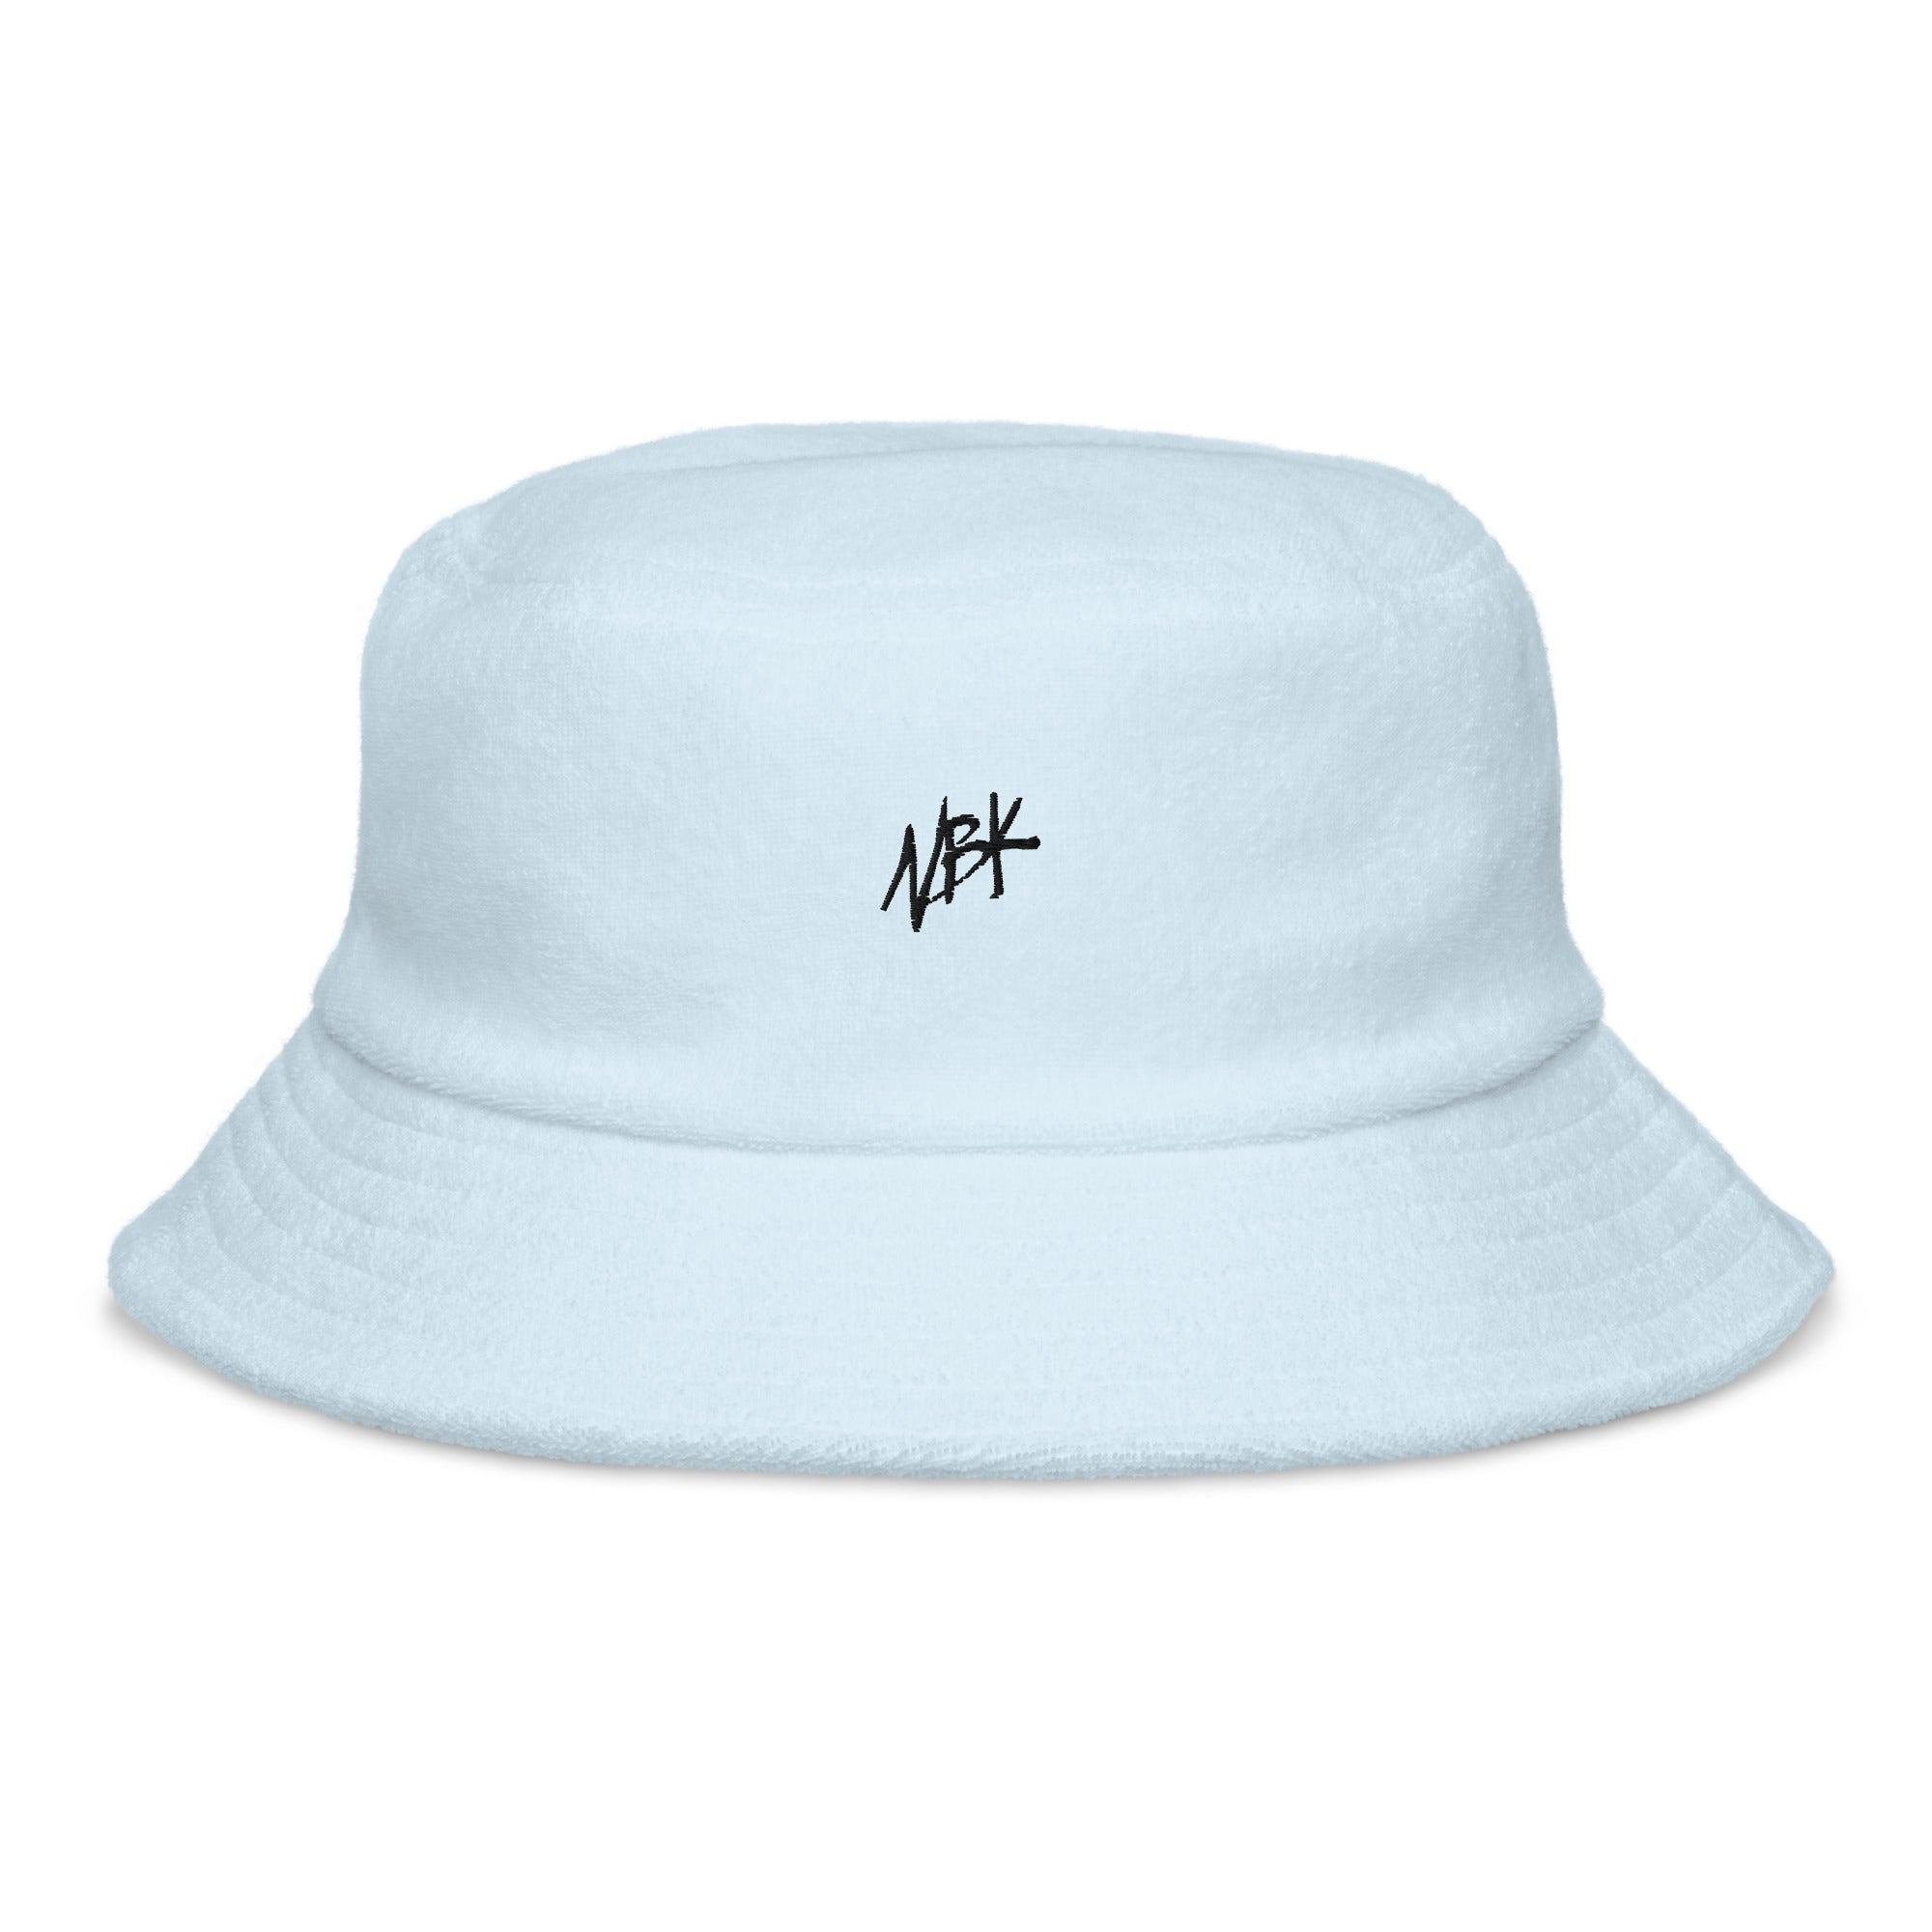 THE TERRY CLOTH BUCKET HAT